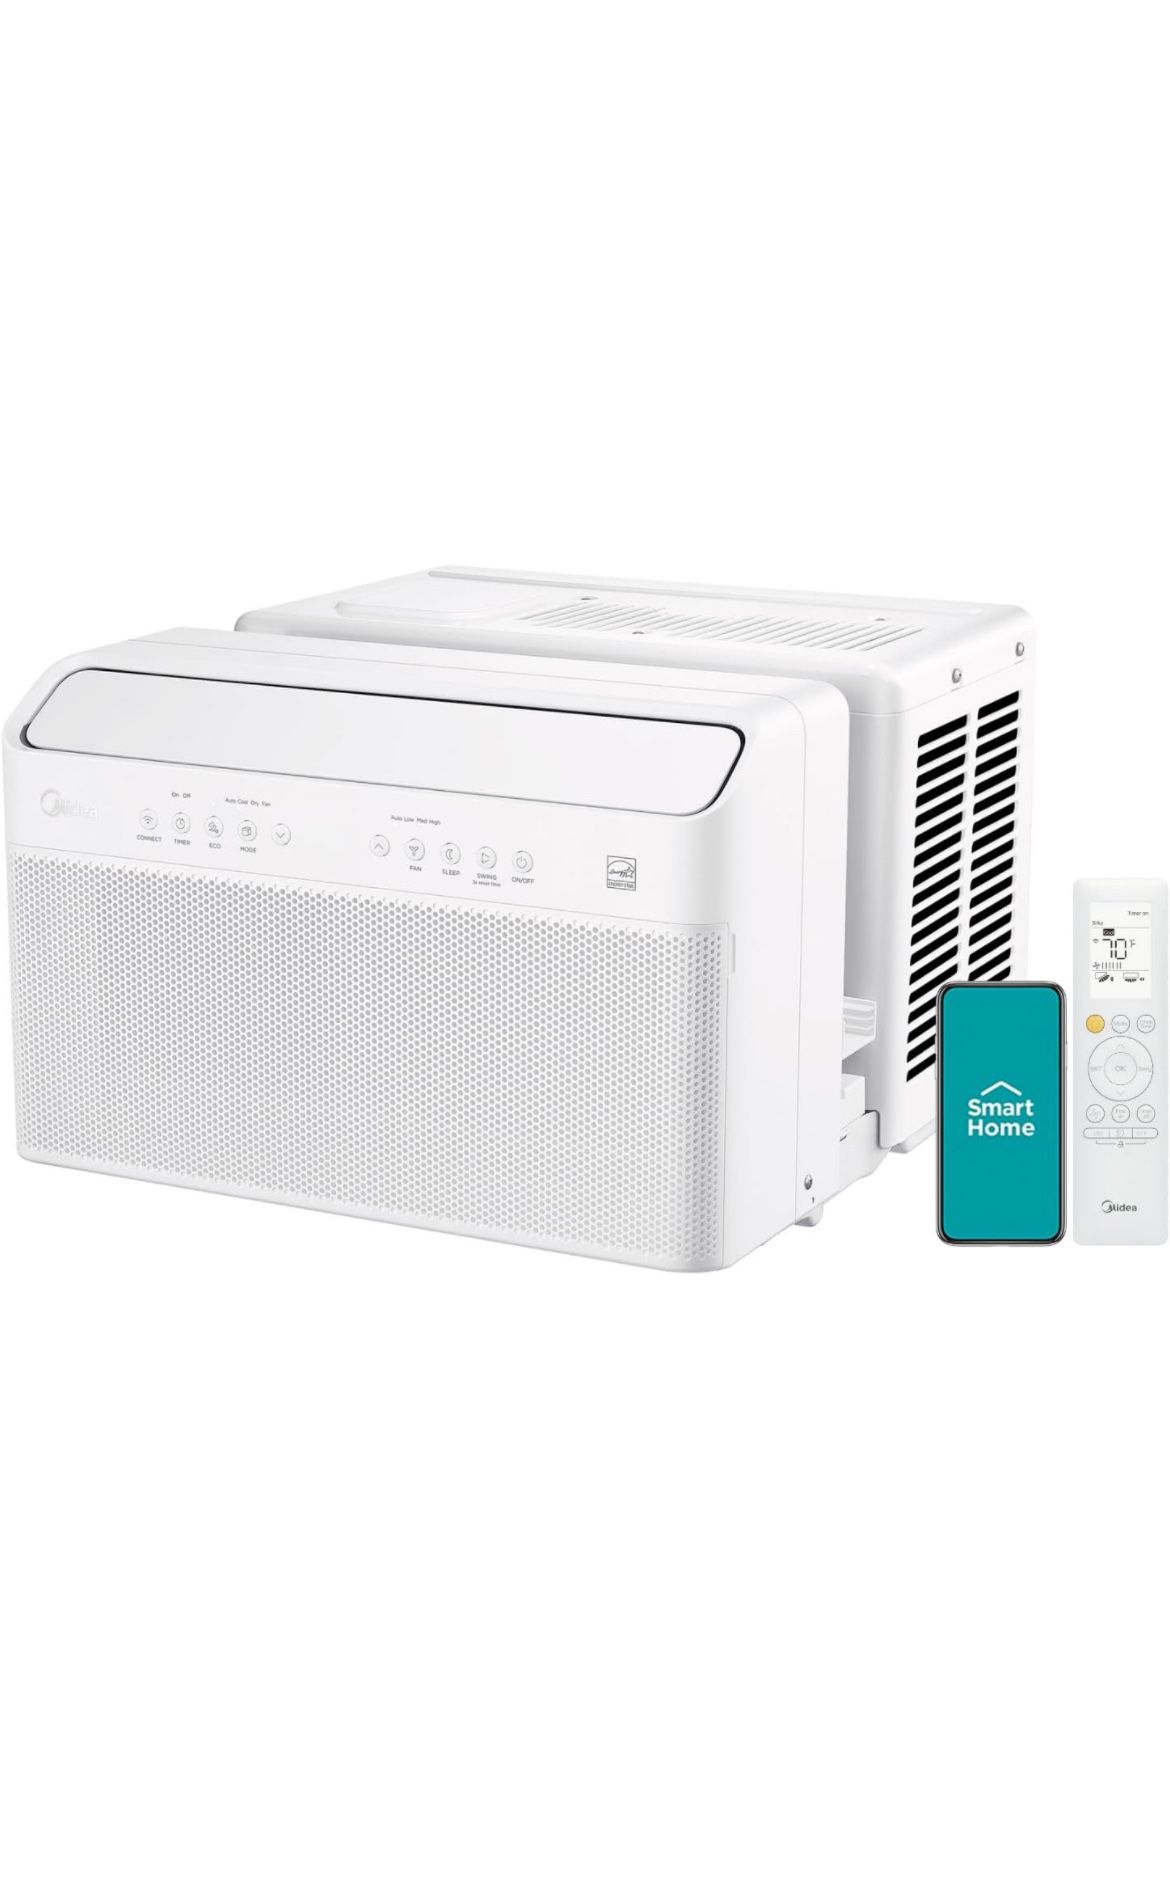 Midea 8,000 BTU U-Shaped Smart Inverter Air Conditioner –Cools up to 350 Sq. Ft., Ultra Quiet with Open Window Flexibility, Works with Alexa/Google As